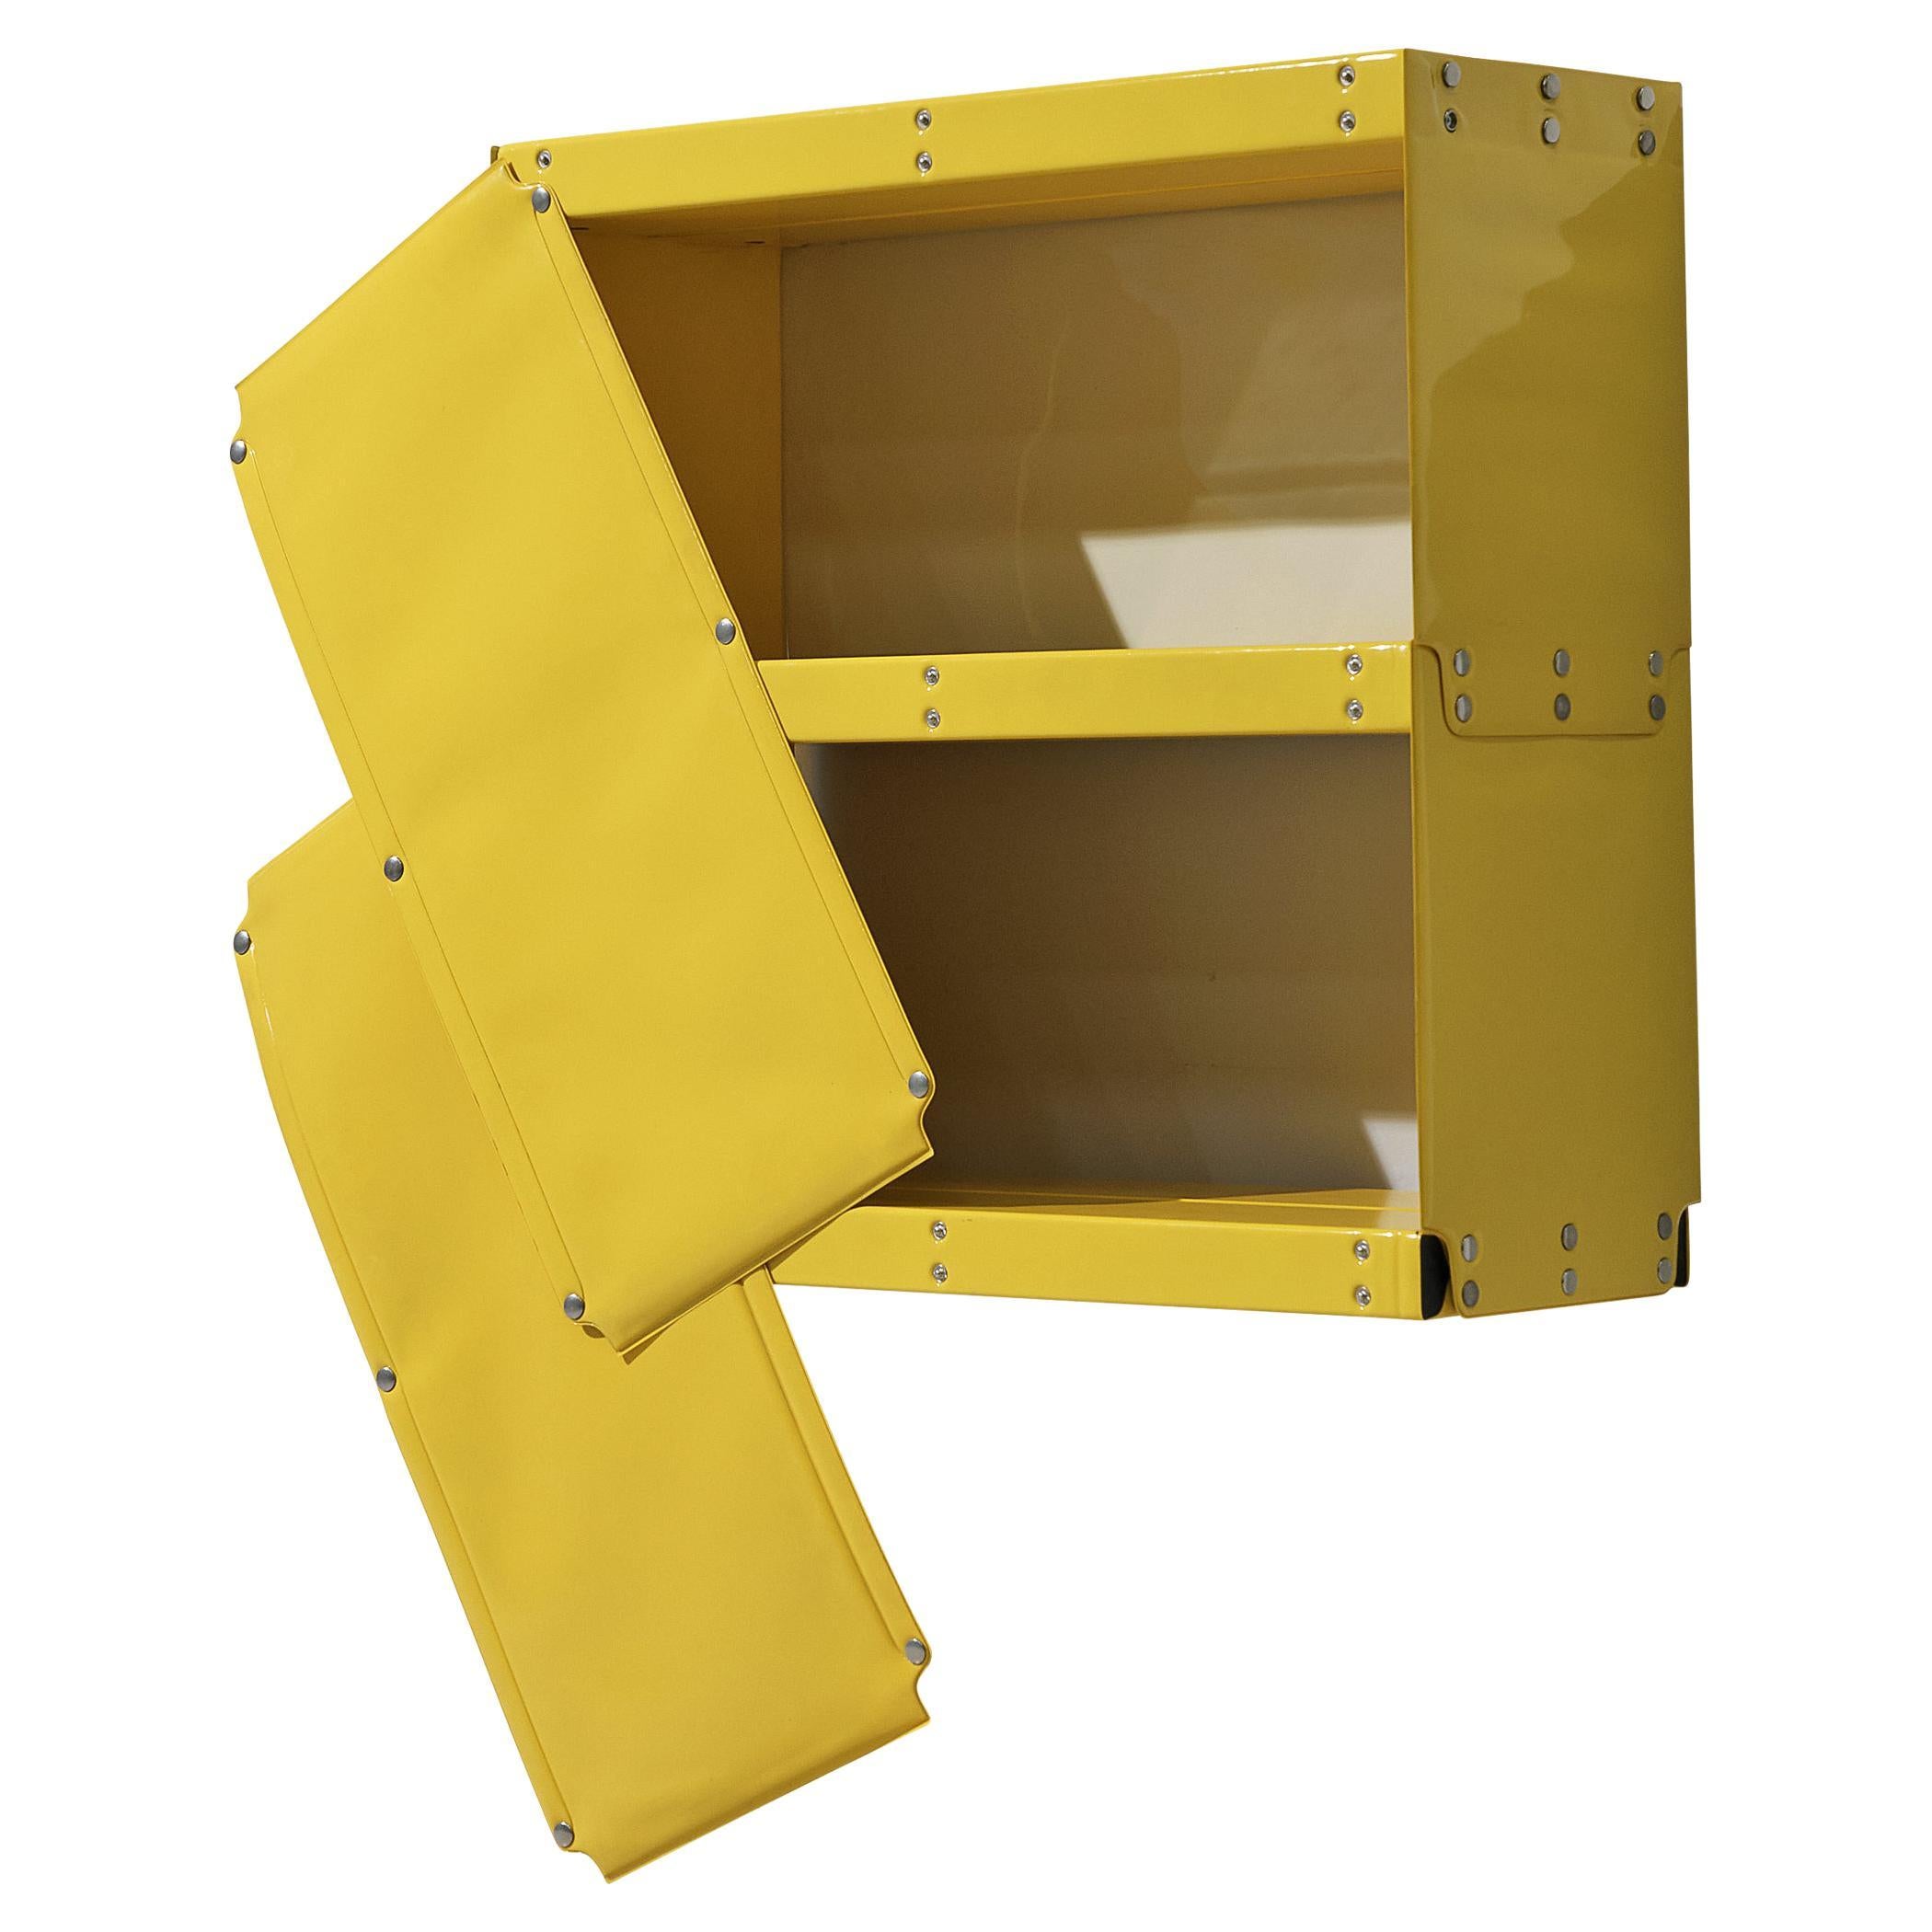 Rare Otto Zapf 'Softline' Wall-Mounted Cabinets in Yellow for Zapfdesign